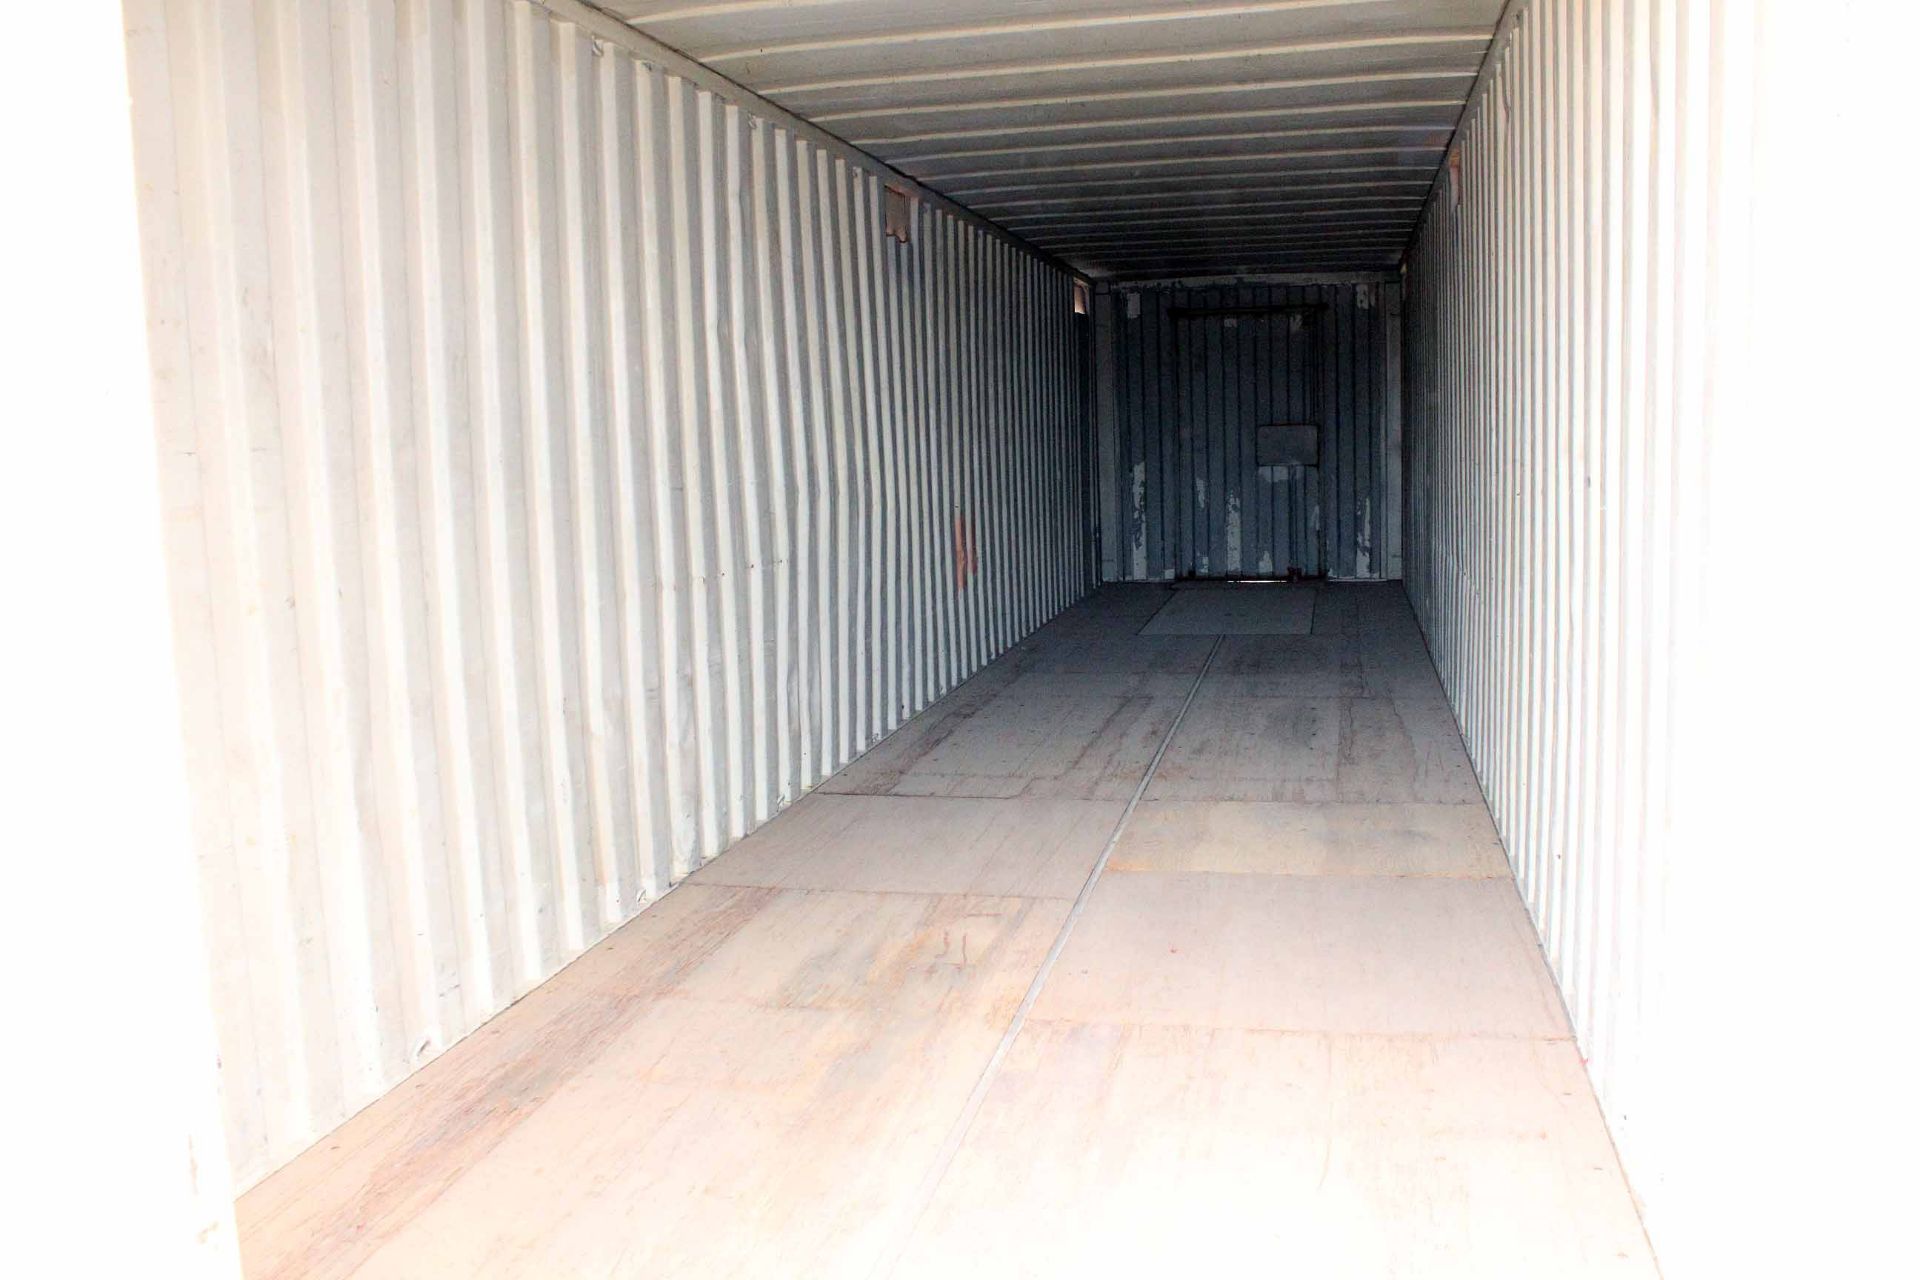 STEEL STORAGE CONTAINER, 40'L. x 96"W. x 8' ht., dbl. swing- out rear doors, front man door (Unit - Image 3 of 4